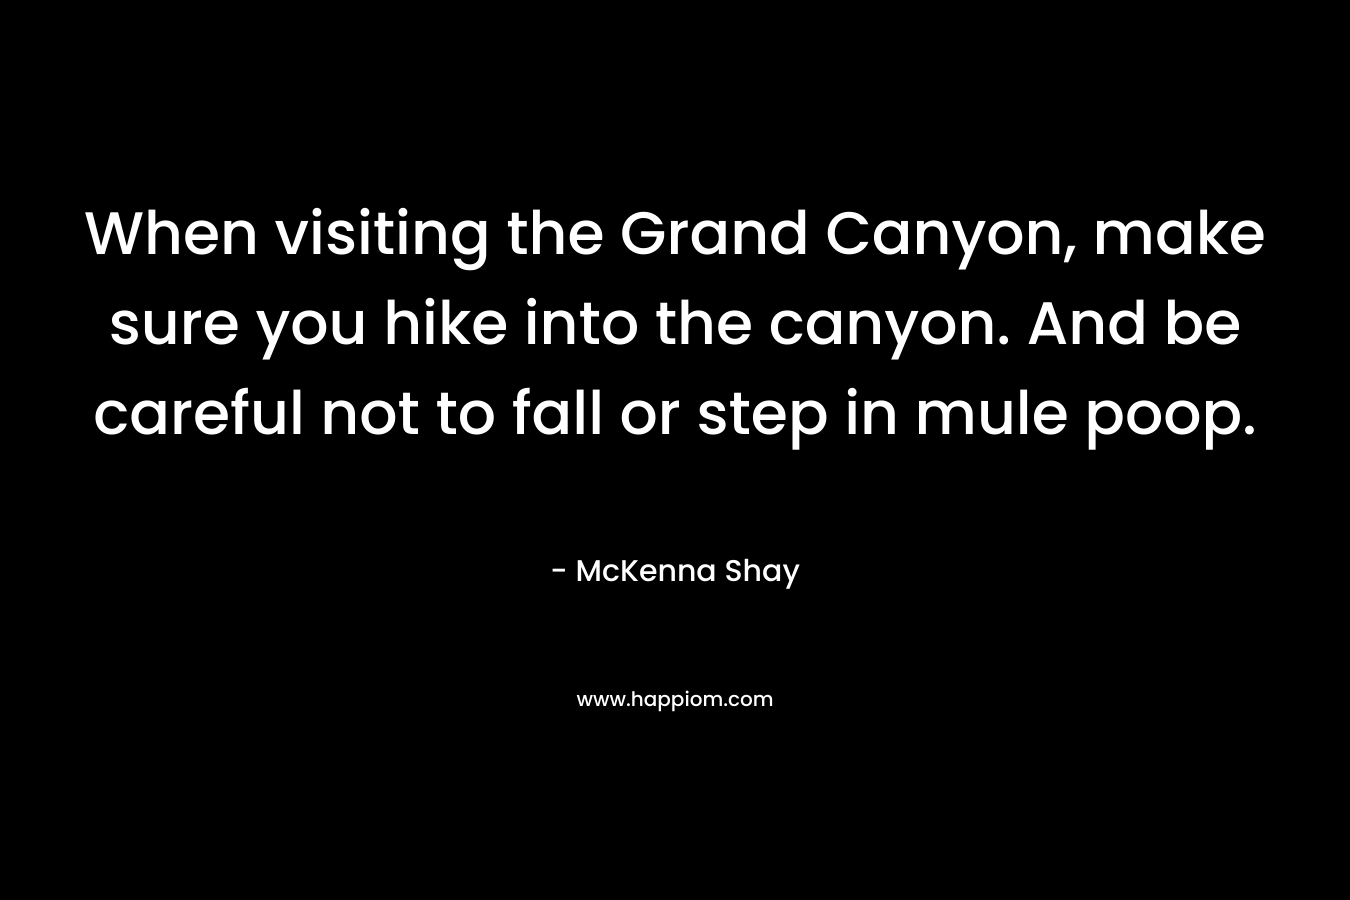 When visiting the Grand Canyon, make sure you hike into the canyon. And be careful not to fall or step in mule poop. – McKenna Shay